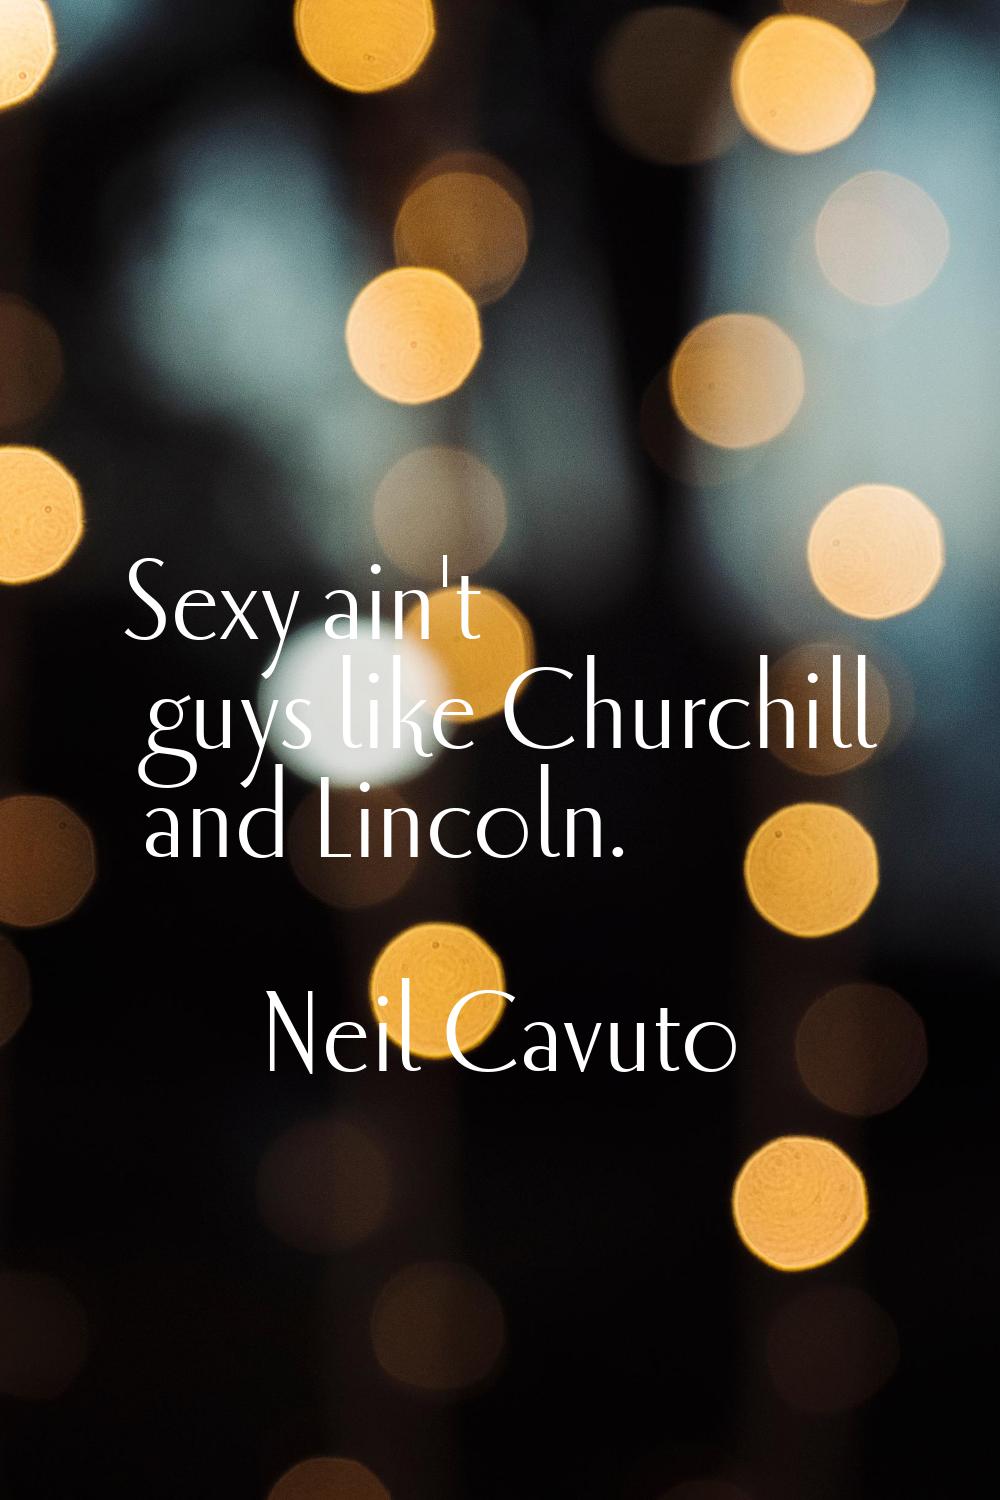 Sexy ain't guys like Churchill and Lincoln.